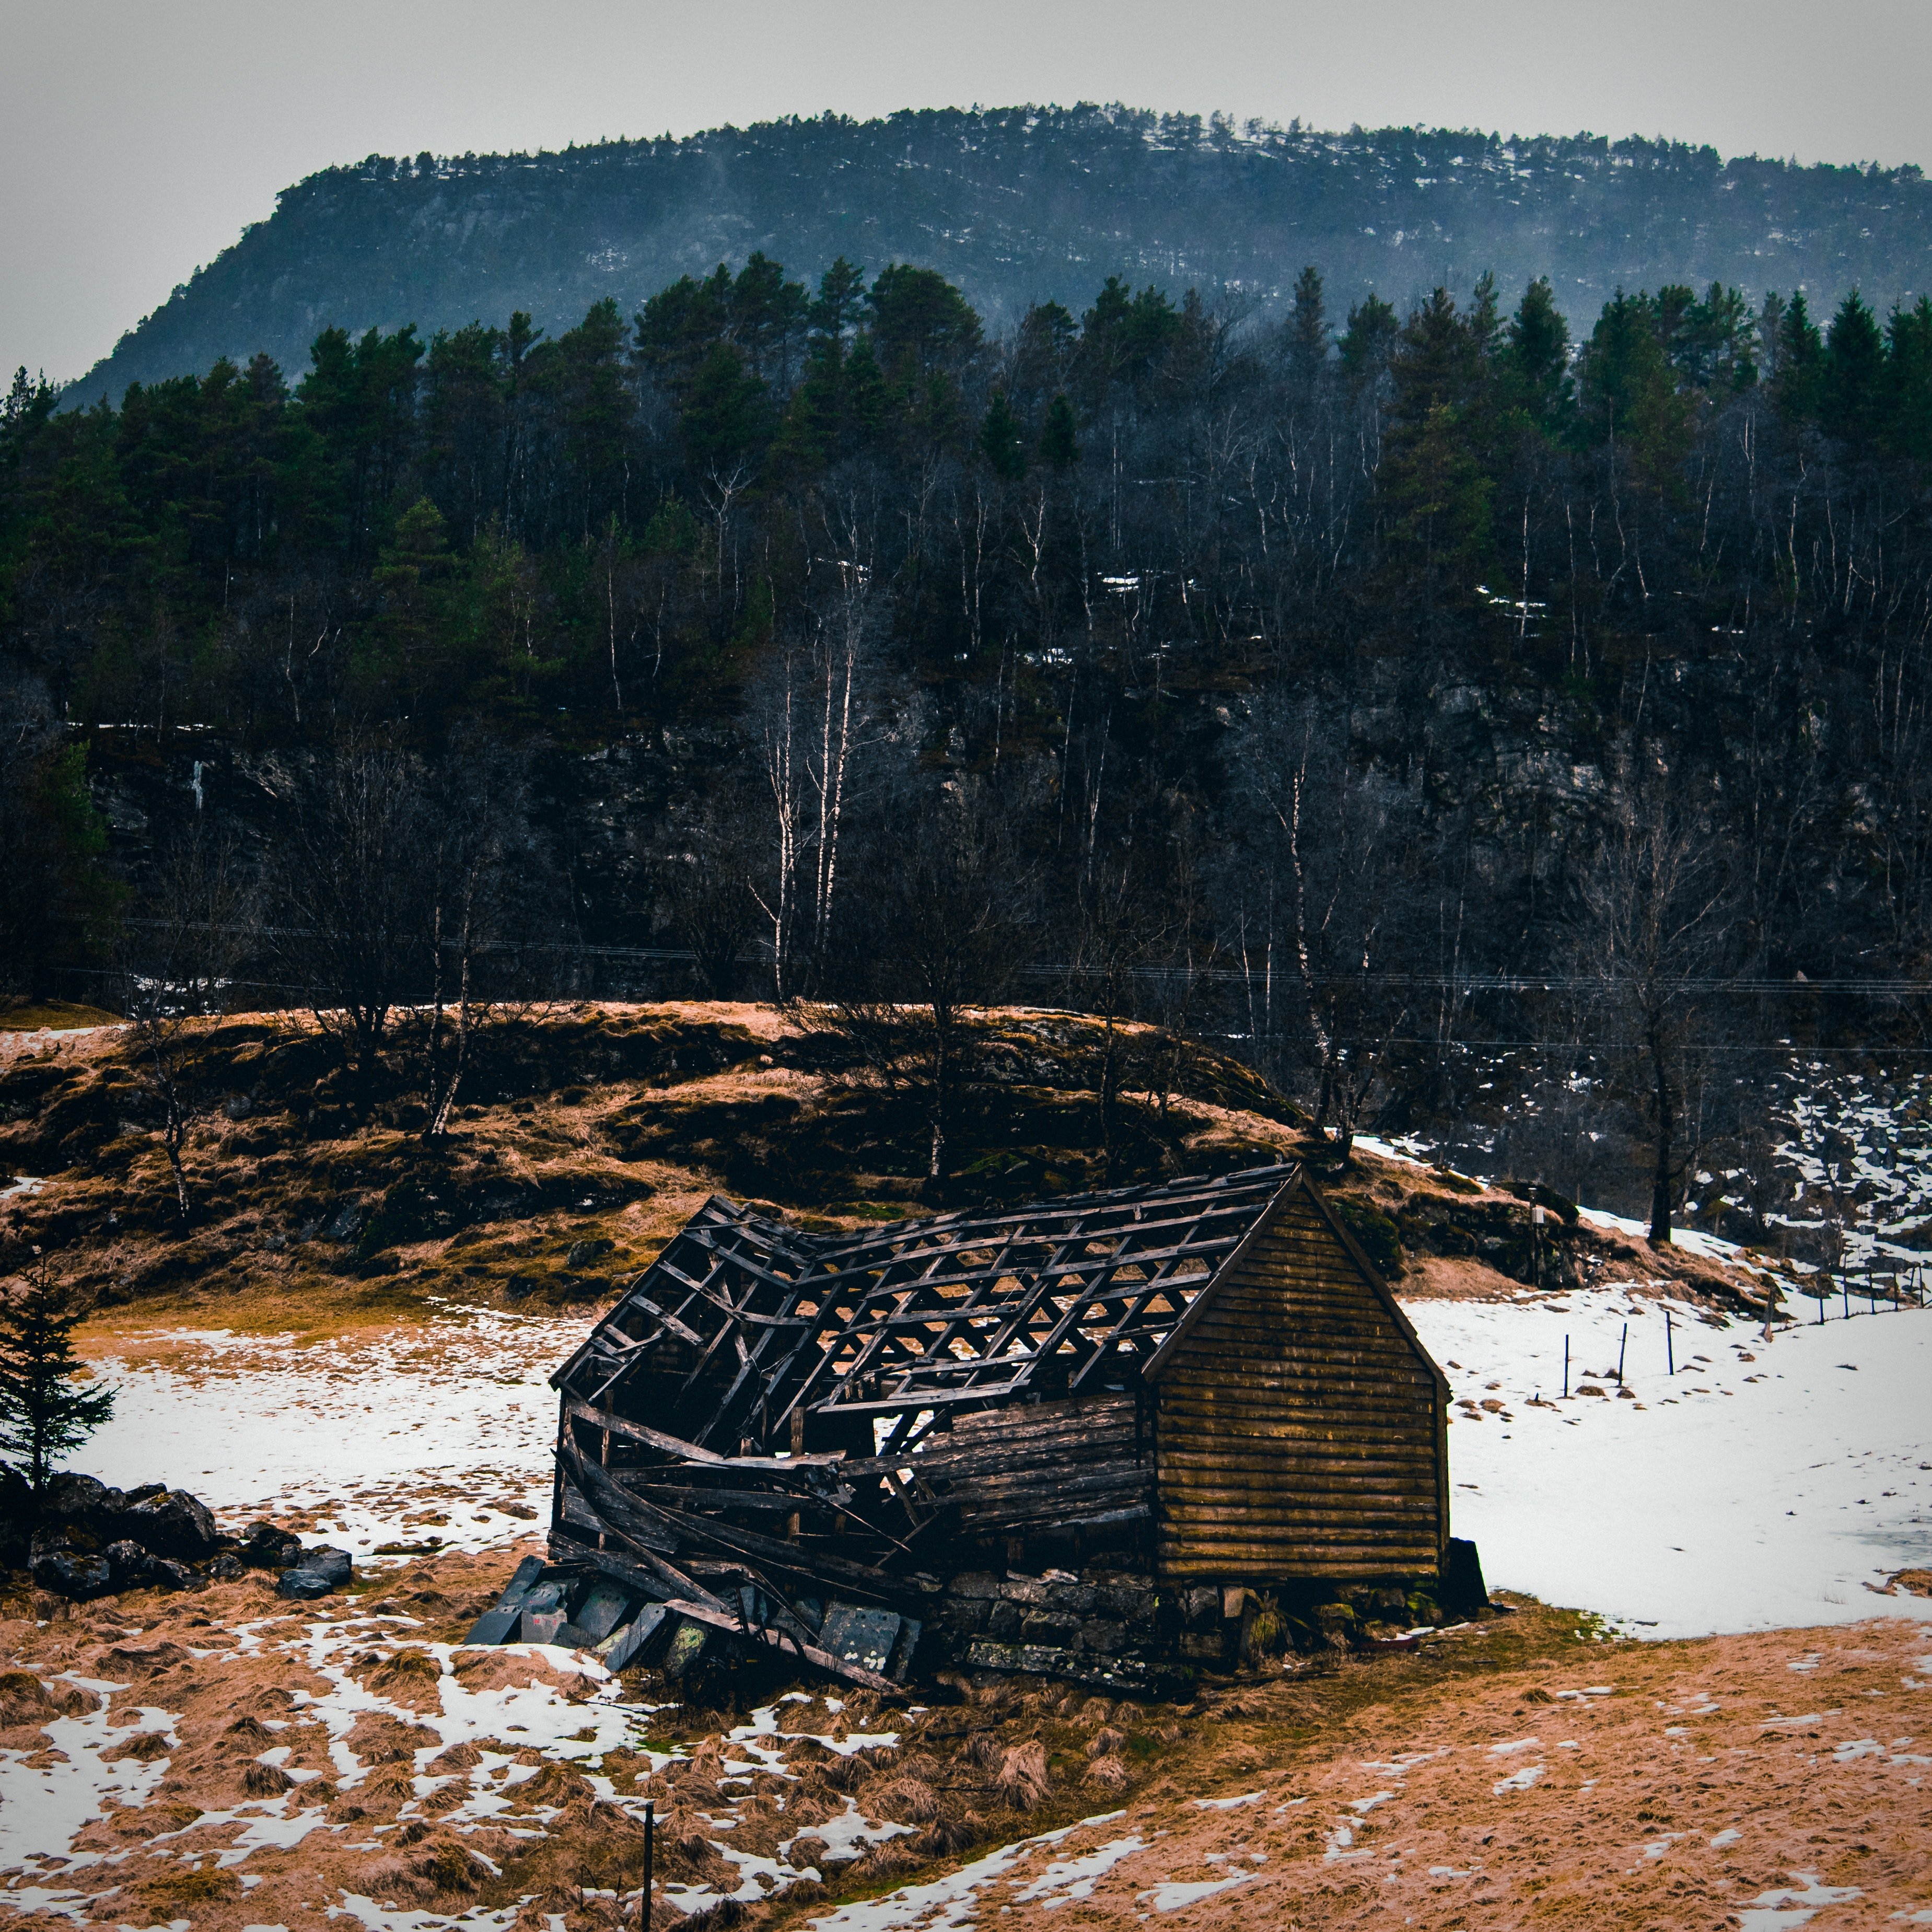 Dylan and grandma Ruth found a ruined cabin in the woods. | Source: Pexels